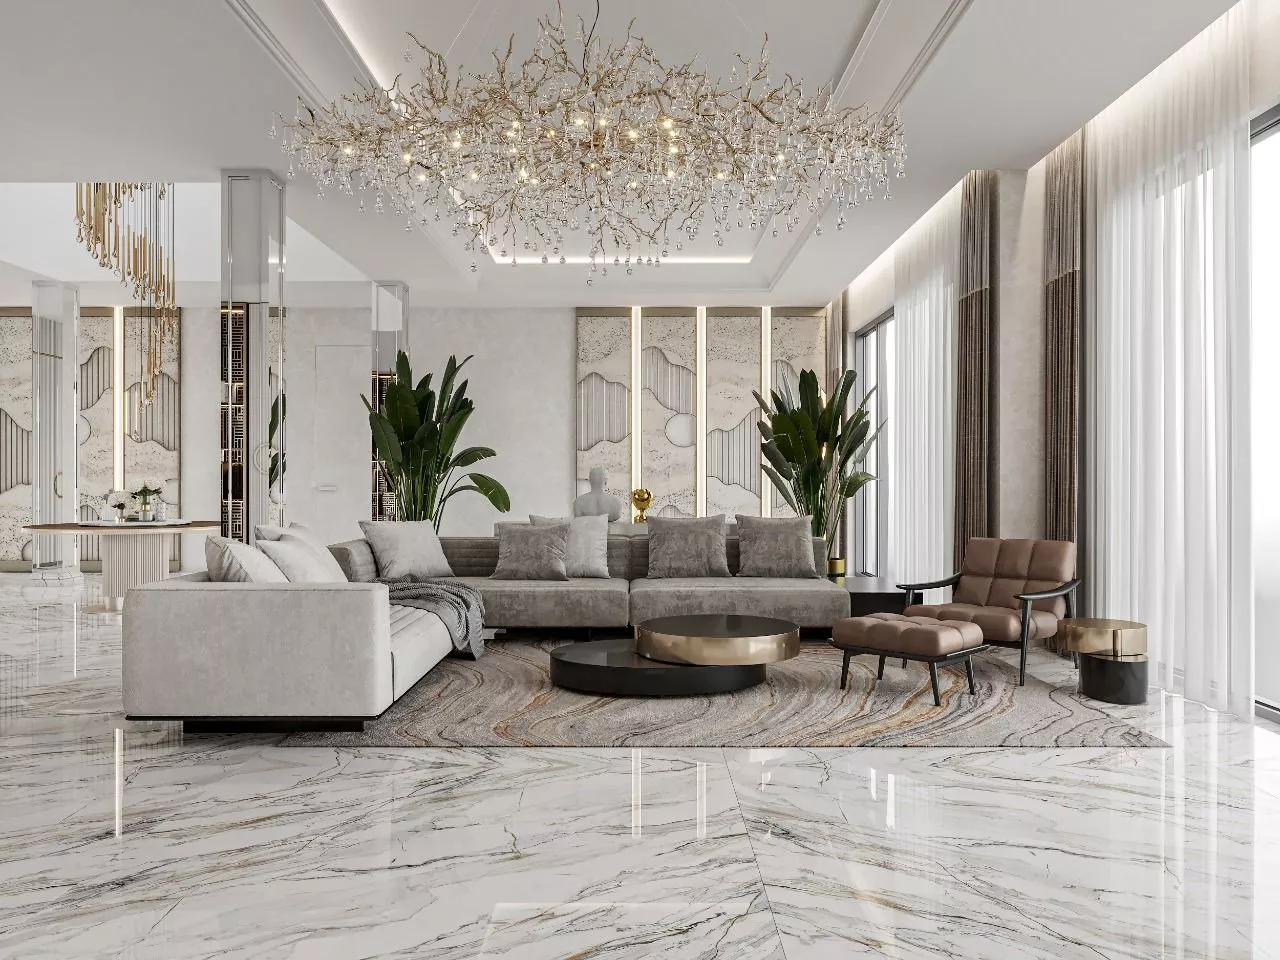 Discover Dubai's Most Luxurious Living Rooms - Step Inside Now!